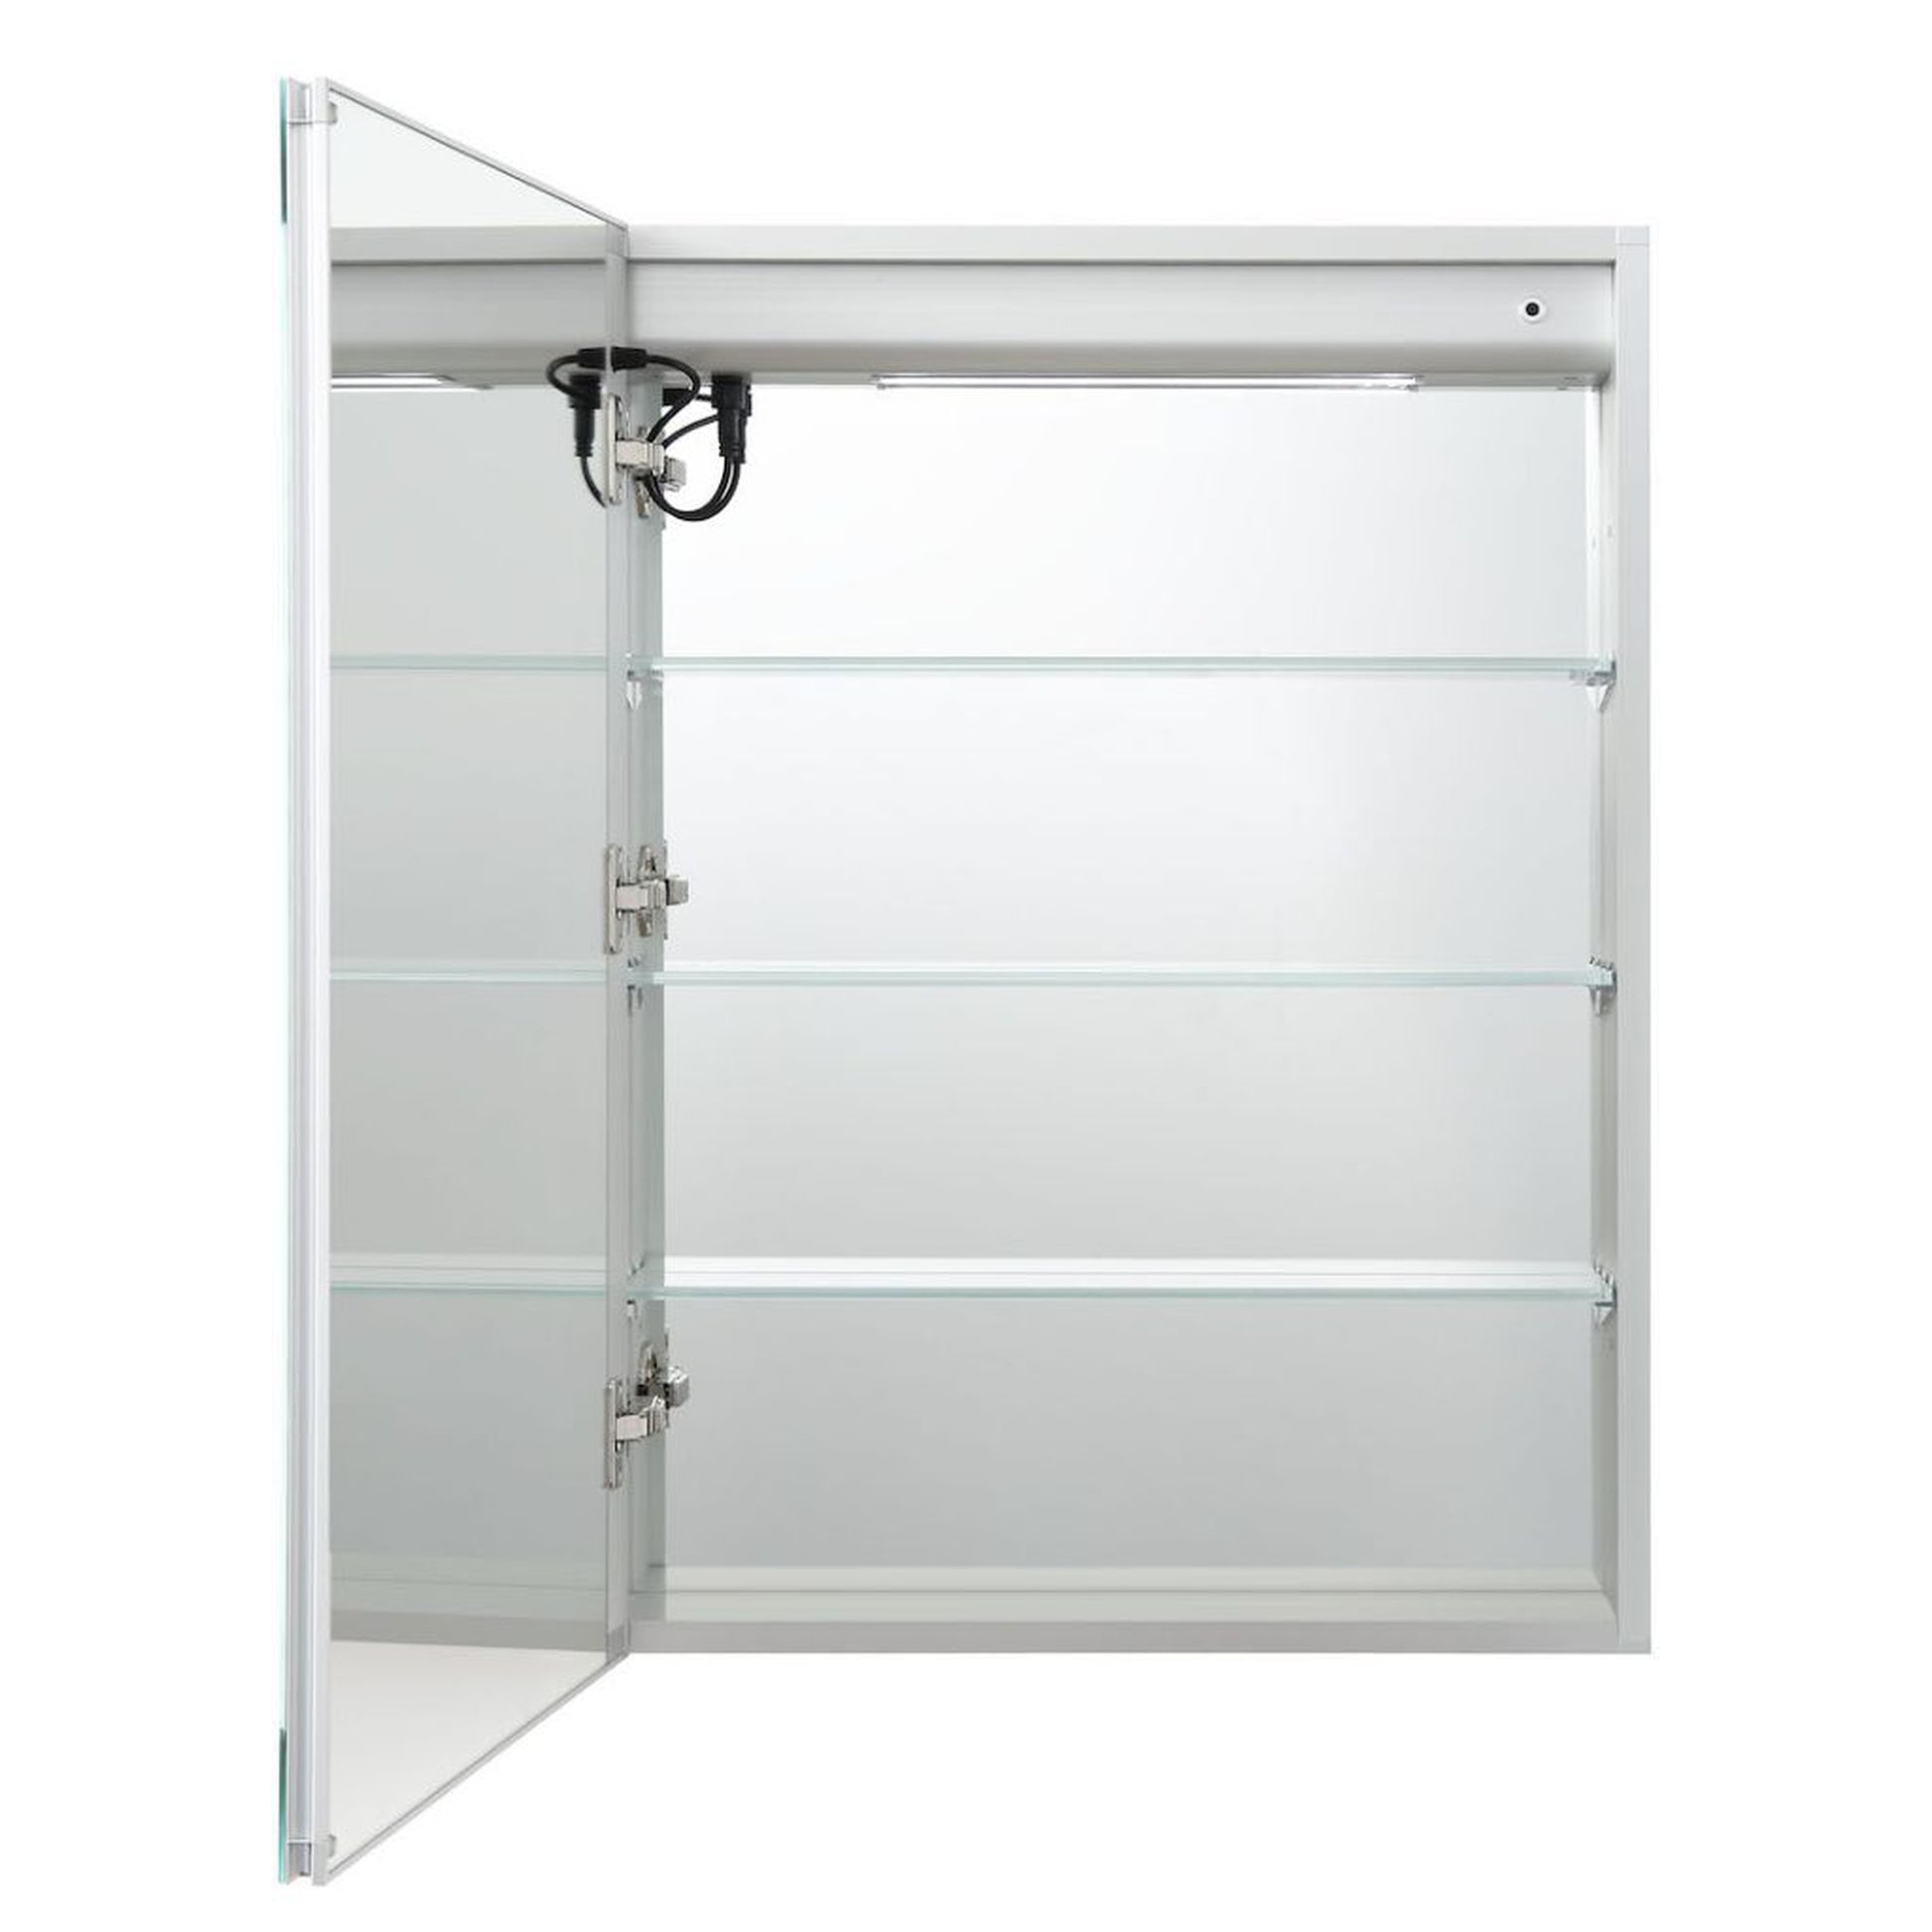 Blossom Vega 20" x 32" Recessed or Surface Mount Left-Hinged Door LED Mirror Medicine Cabinet With 3 Adjustable Glass Shelves and Built-In Defogger